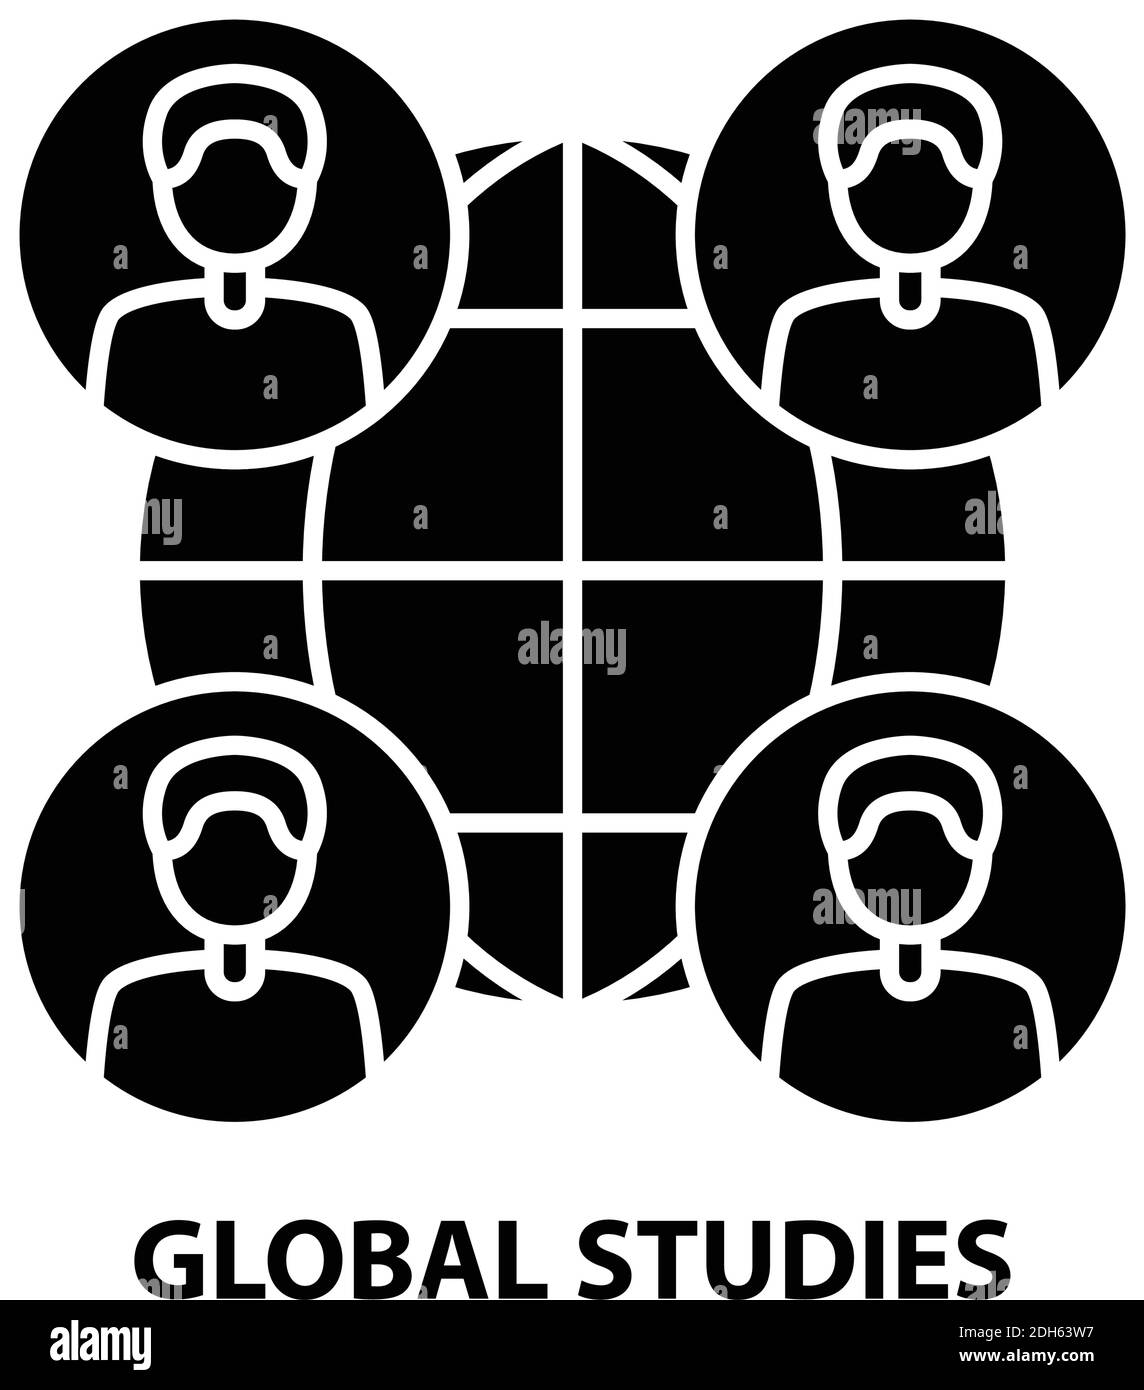 global studies icon, black vector sign with editable strokes, concept illustration Stock Vector